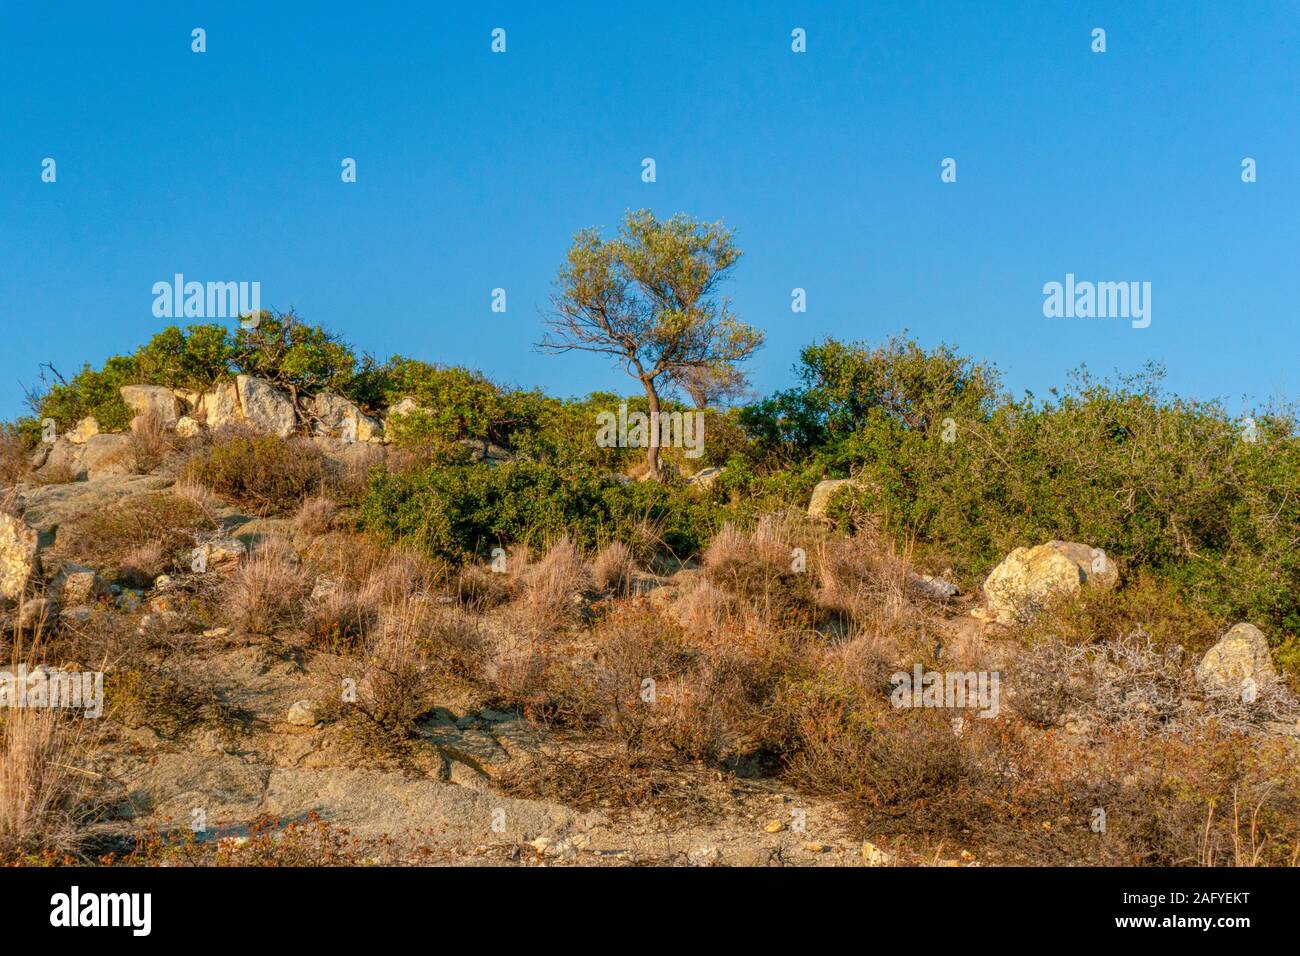 Green and dry shrubs against the blue sky in Greece horizontal Stock Photo